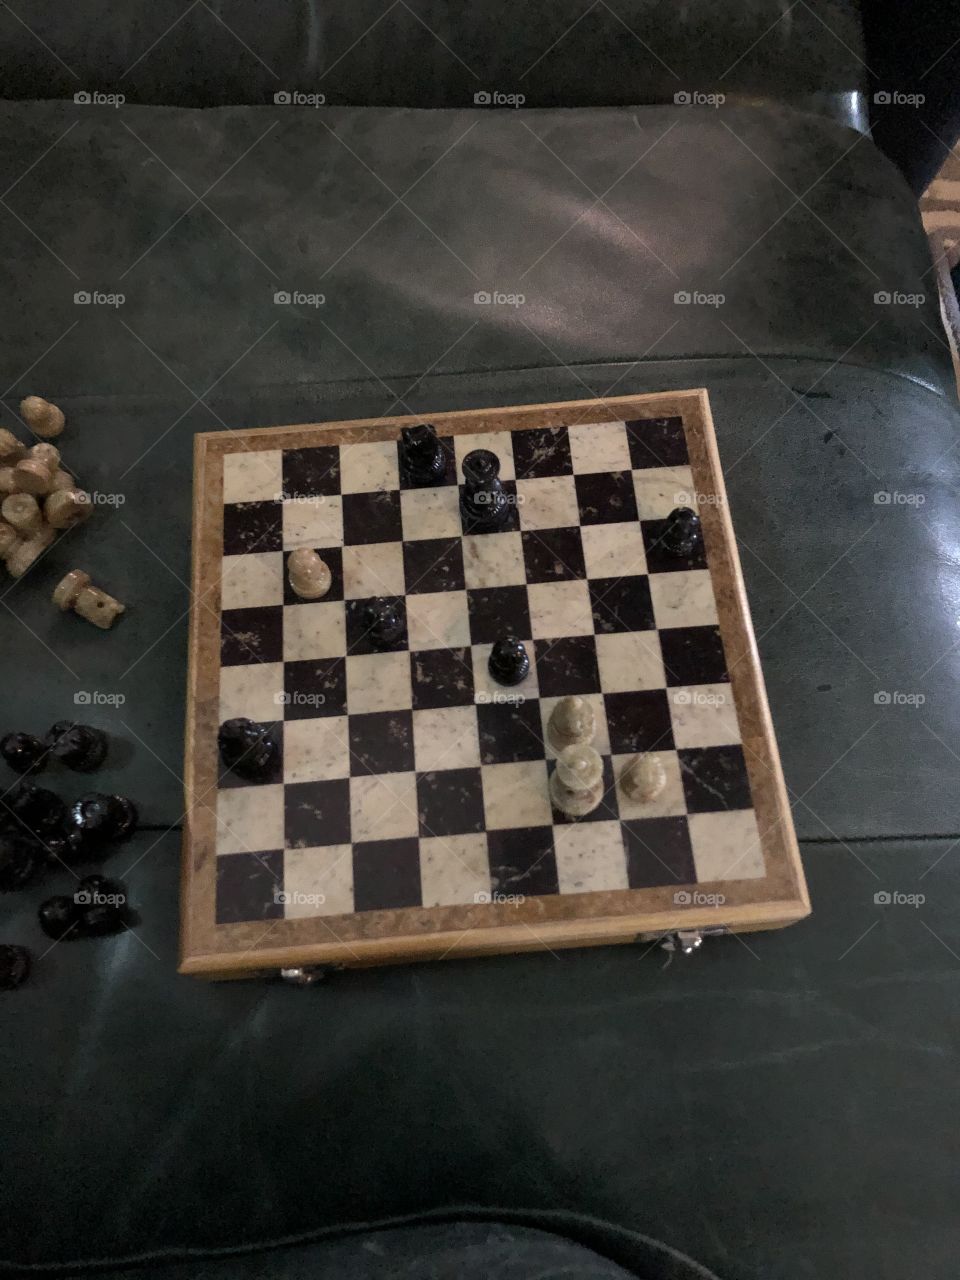 Chess match coming down to the final destination.